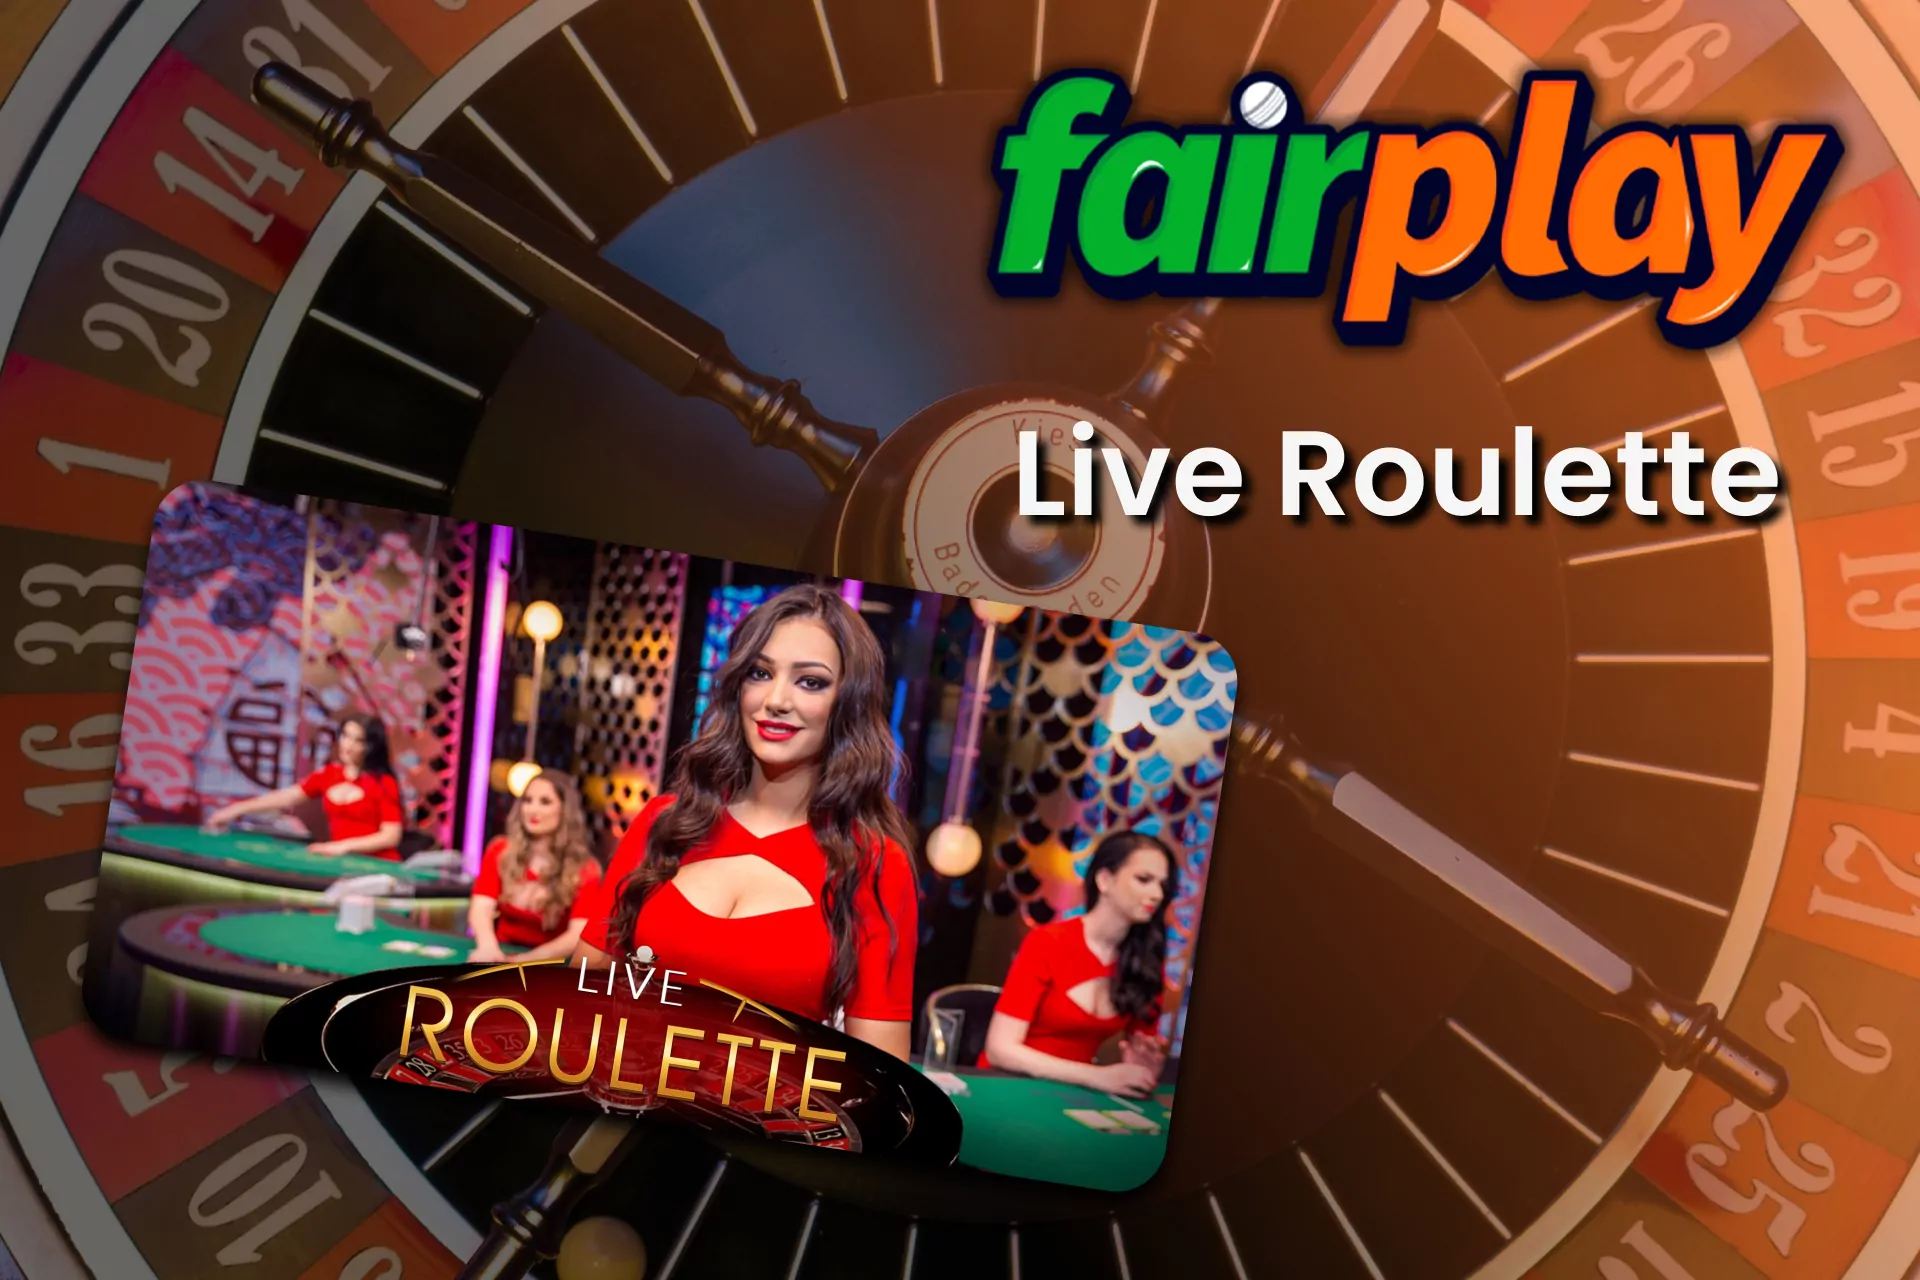 Play Roulette on Fairplay.